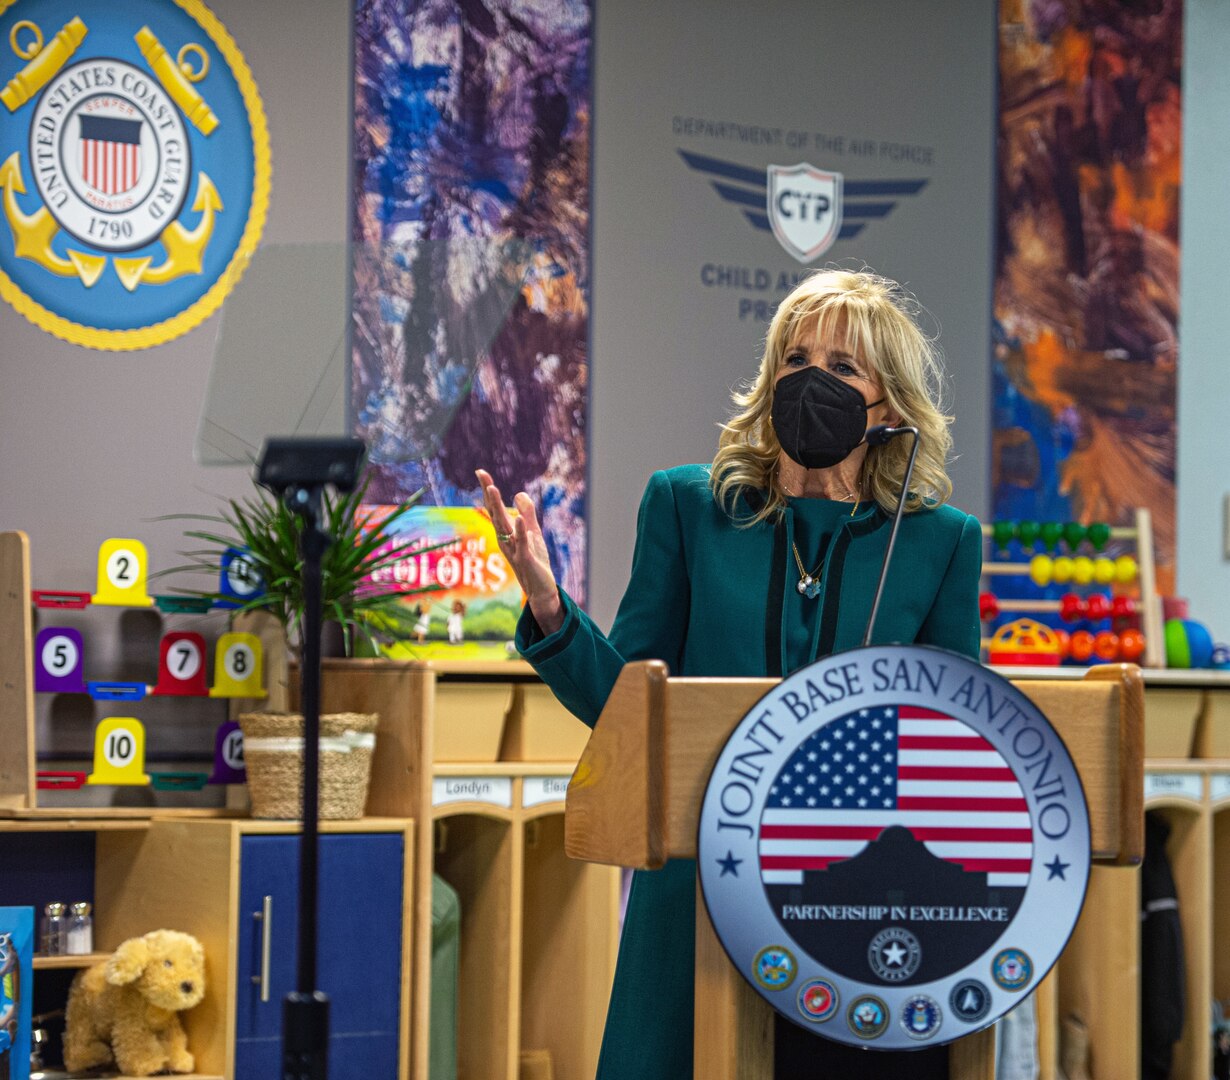 First Lady visits JBSA-Lackland to discuss Joining Forces initiative